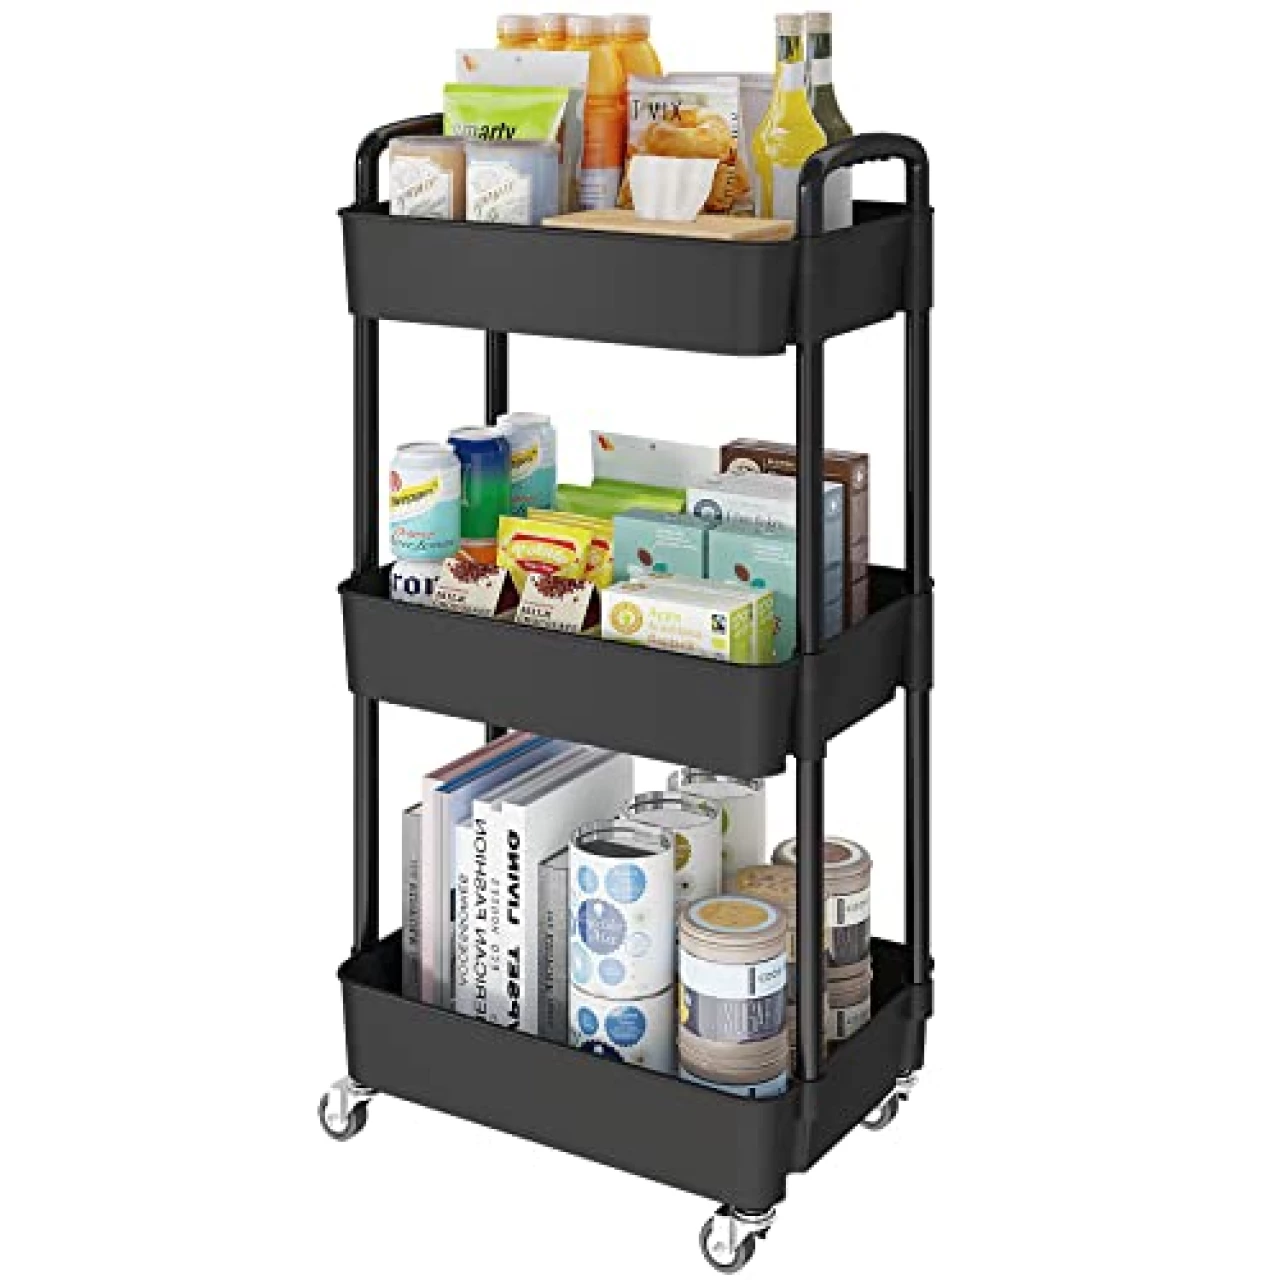 Laiensia 3-Tier Kitchen Storage Cart,Multifunction Utility Rolling Storage Organizer,Mobile Shelving Unit Cart with Lockable Wheels for Bathroom,Laundry,Living Room,With Classified Stickers,Black